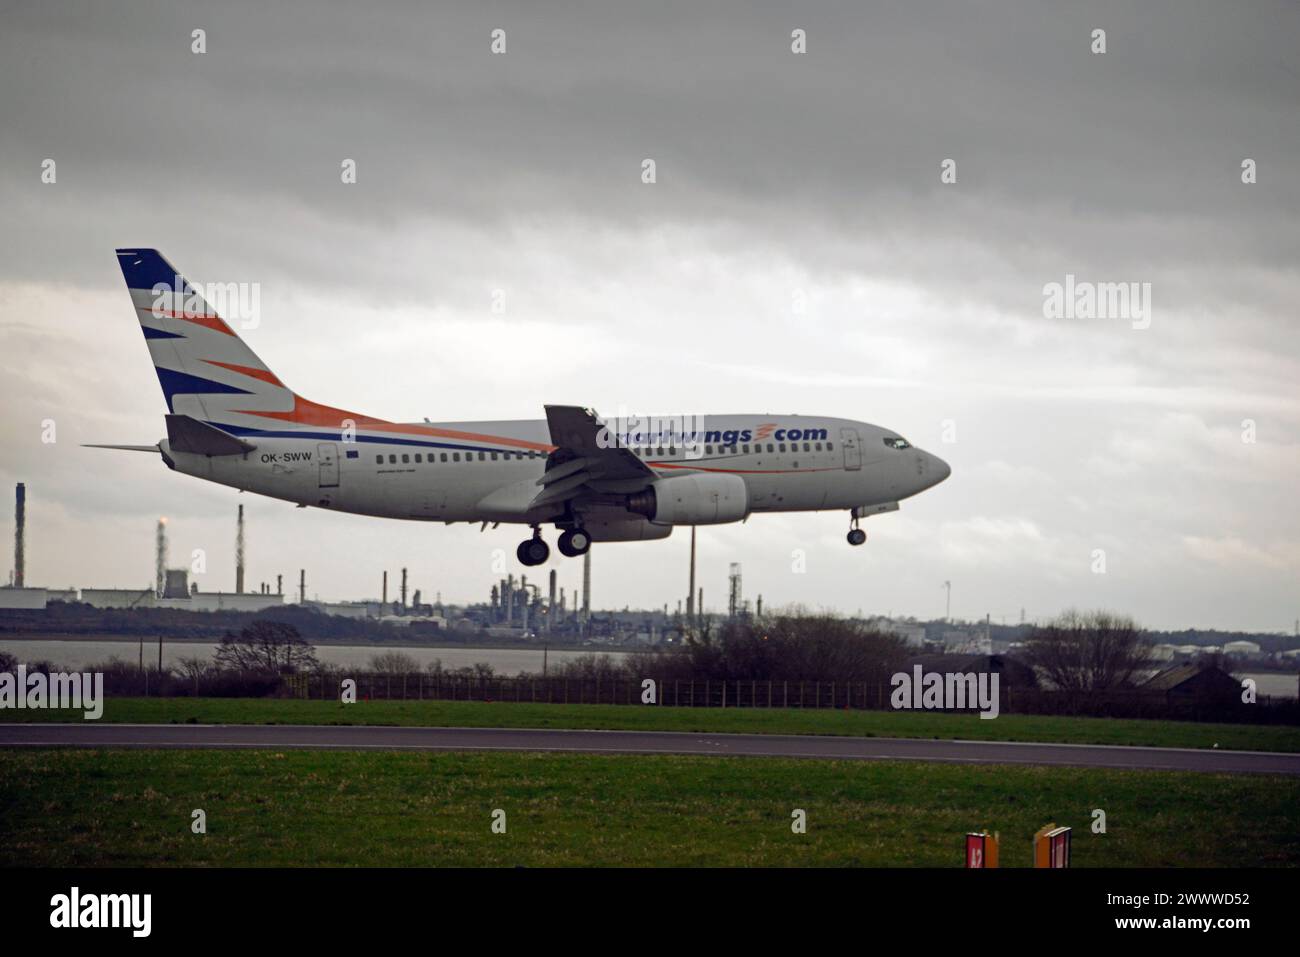 SMARTWINGS BOEING 737-700, OK-SWW, arriving at LIVERPOOL JOHN LENNON AIRPORT from PRAGUE Stock Photo